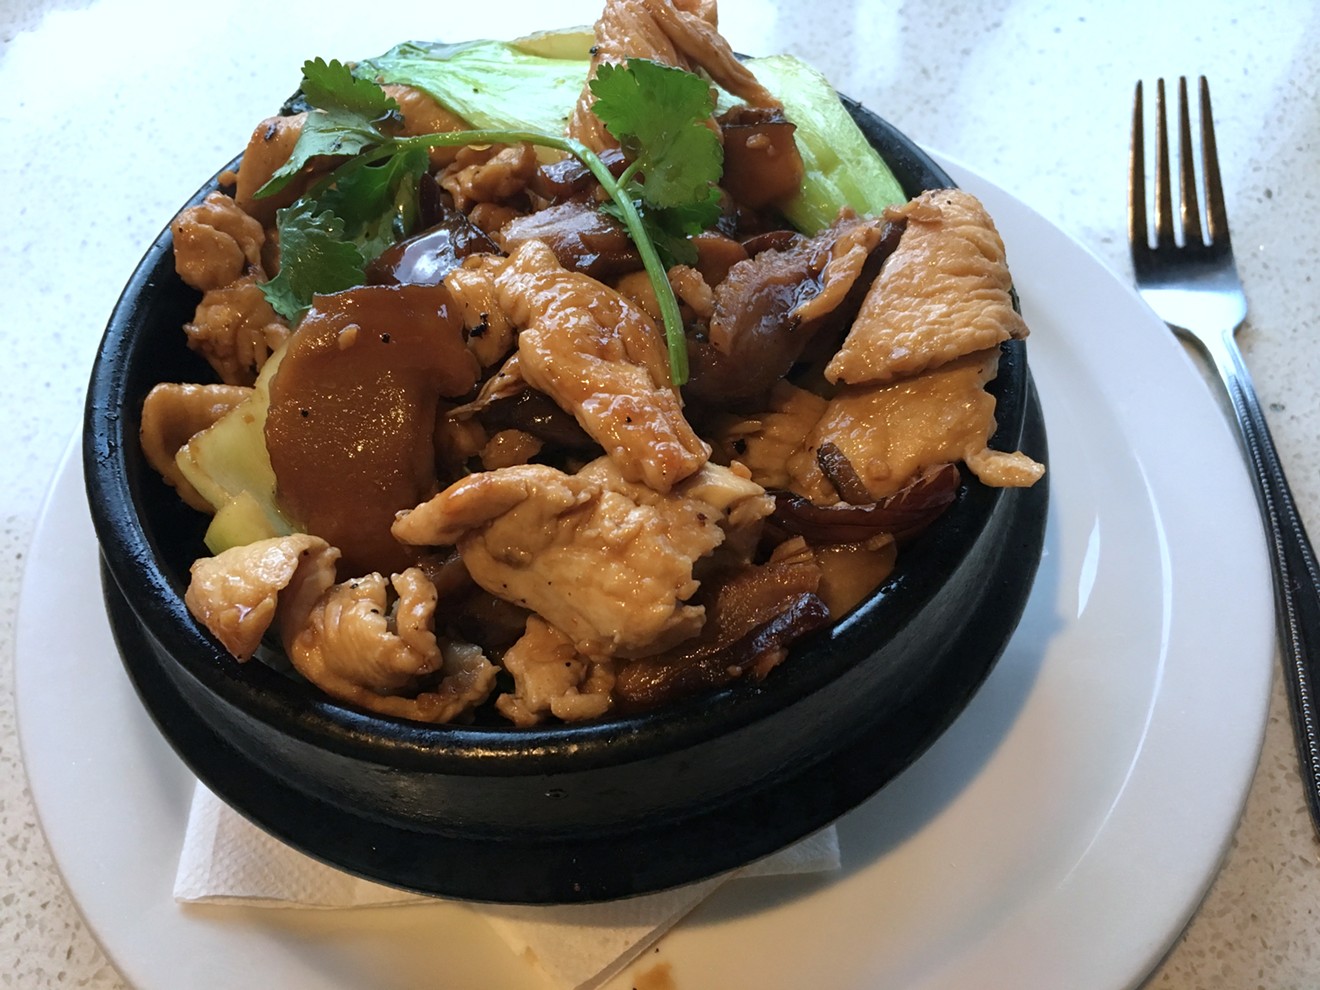 Chicken, jasmine rice, and vegetables in a sizzling clay pot.